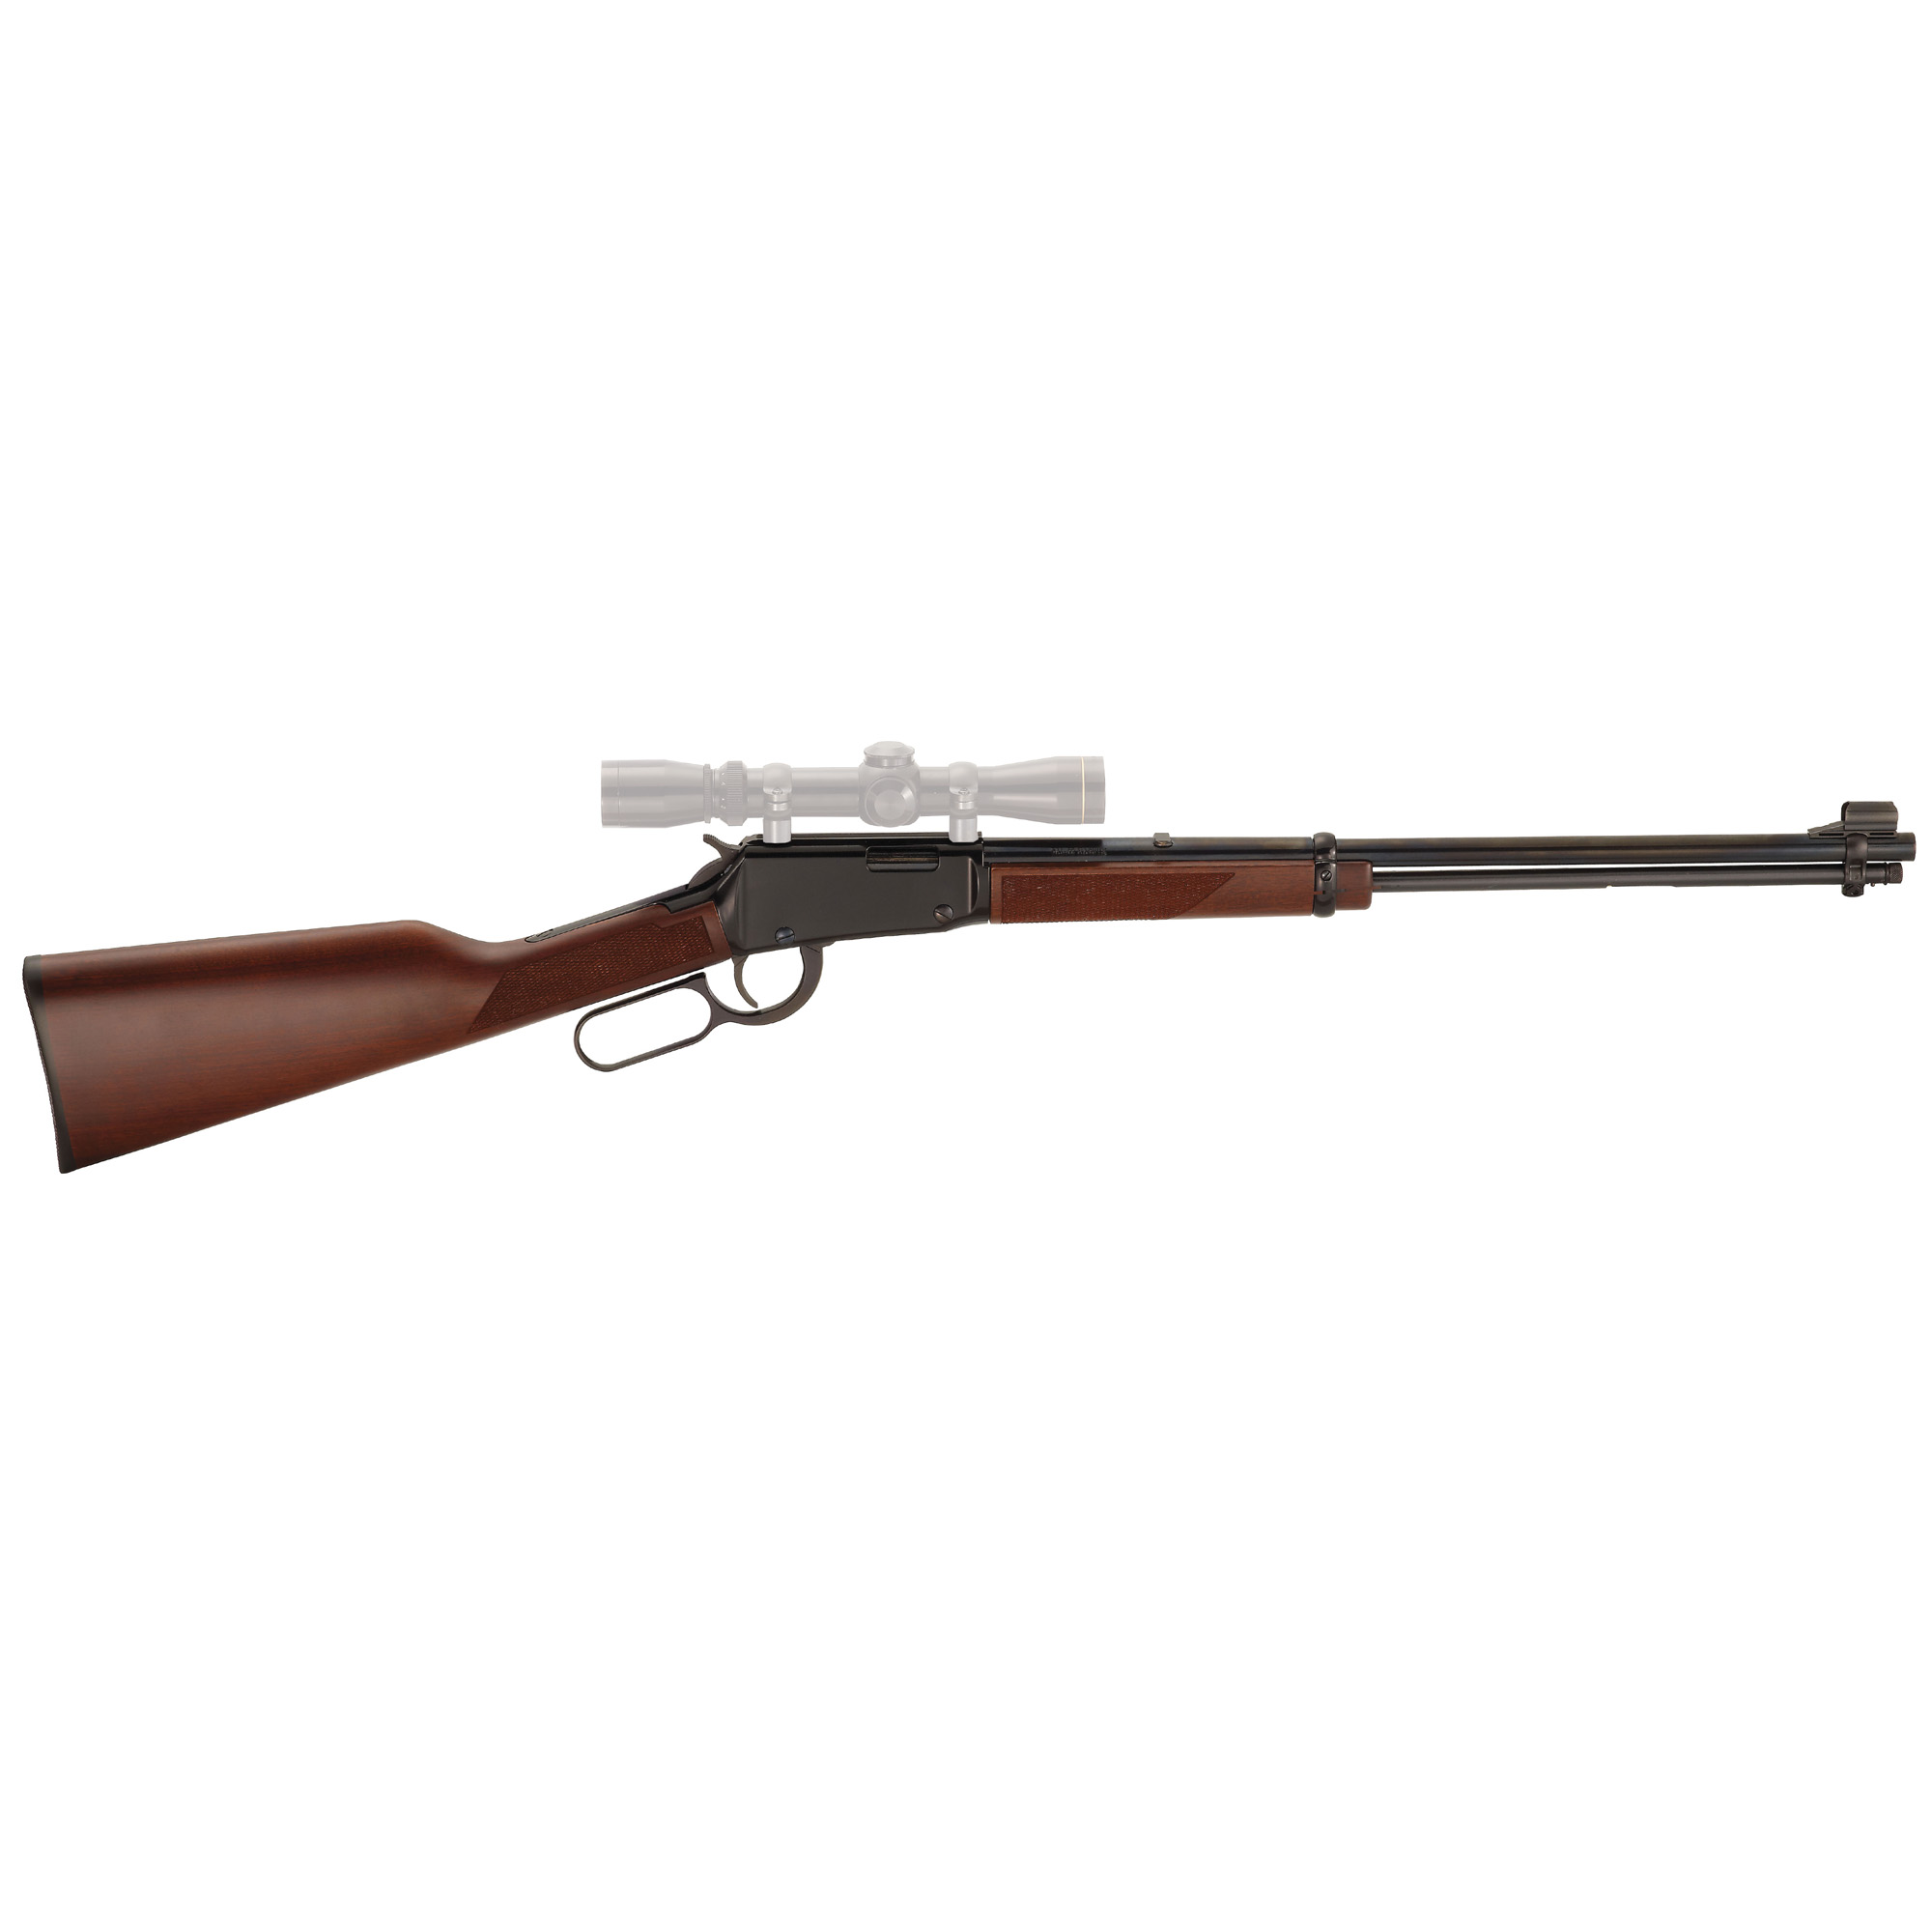 Henry Repeating Arms, Lever Action, 22WMR, 19.25" Barrel, Blue Finish, Walnut Stock, Adjustable Sights, 11Rd